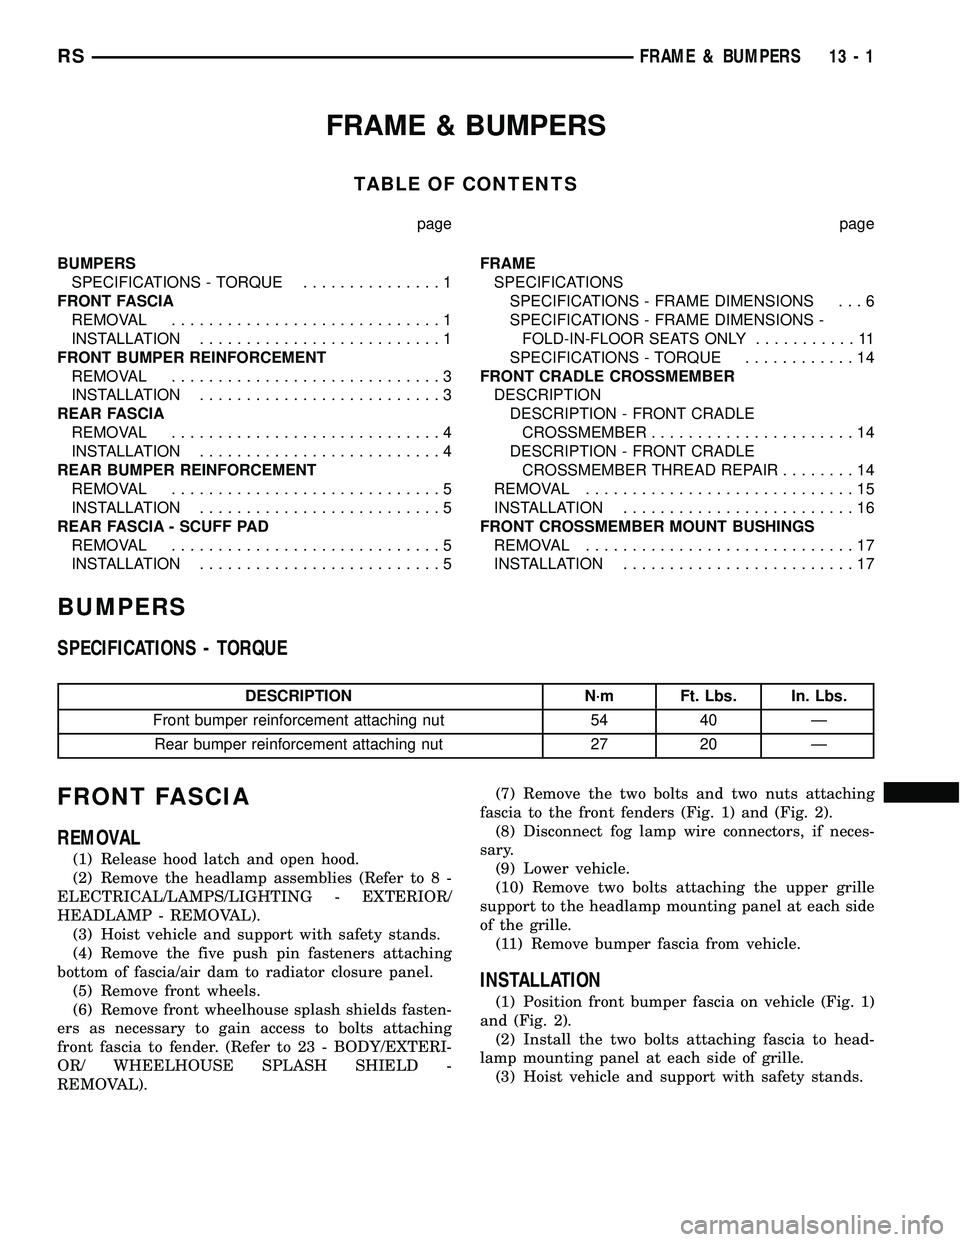 CHRYSLER VOYAGER 2005  Service Manual FRAME & BUMPERS
TABLE OF CONTENTS
page page
BUMPERS
SPECIFICATIONS - TORQUE...............1
FRONT FASCIA
REMOVAL.............................1
INSTALLATION..........................1
FRONT BUMPER REIN